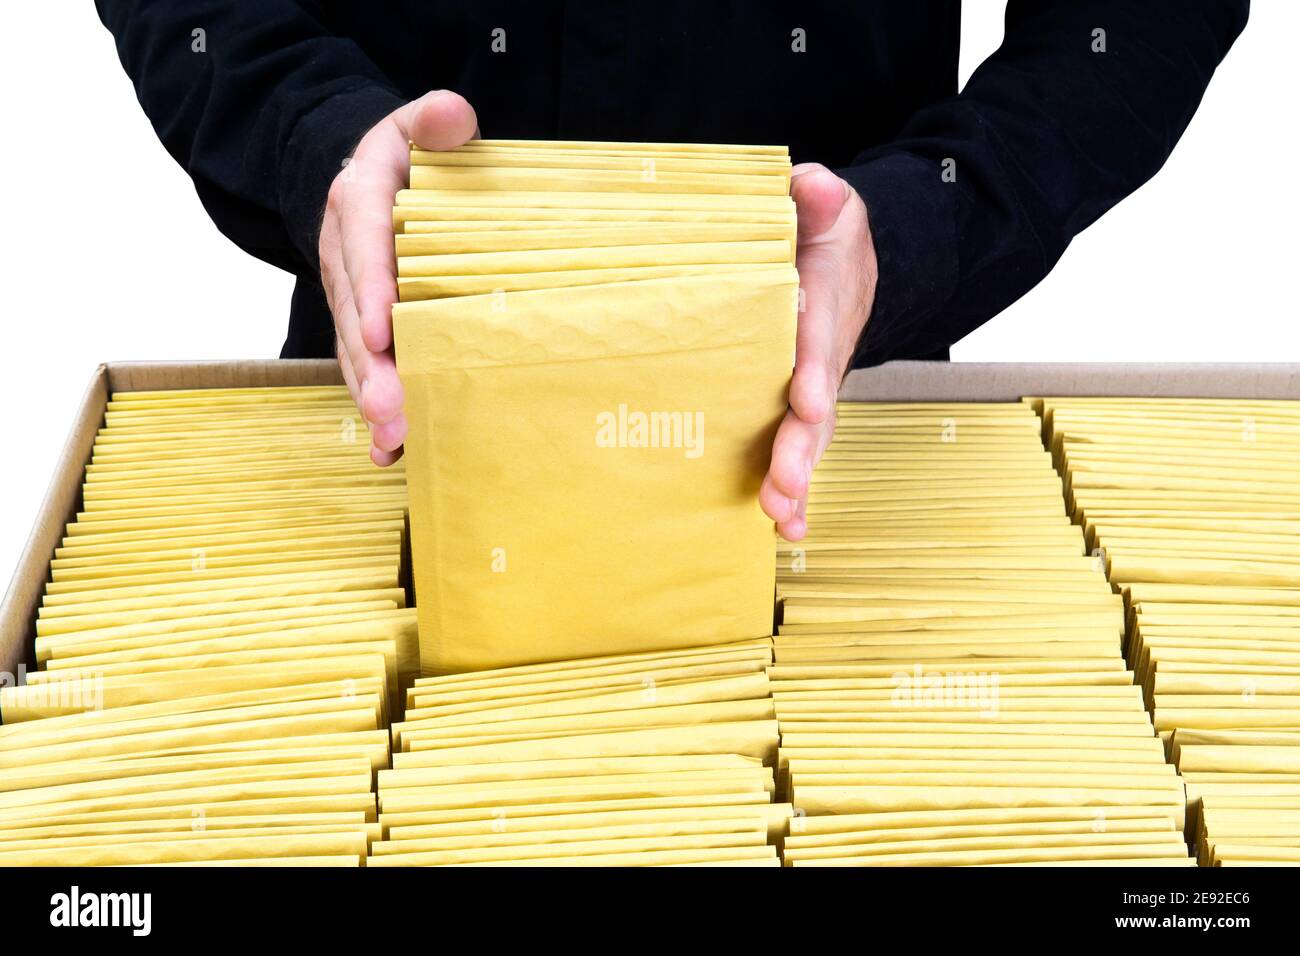 Man in black uniform packing yellow padded bubble envelopes in a large cardboard box Stock Photo